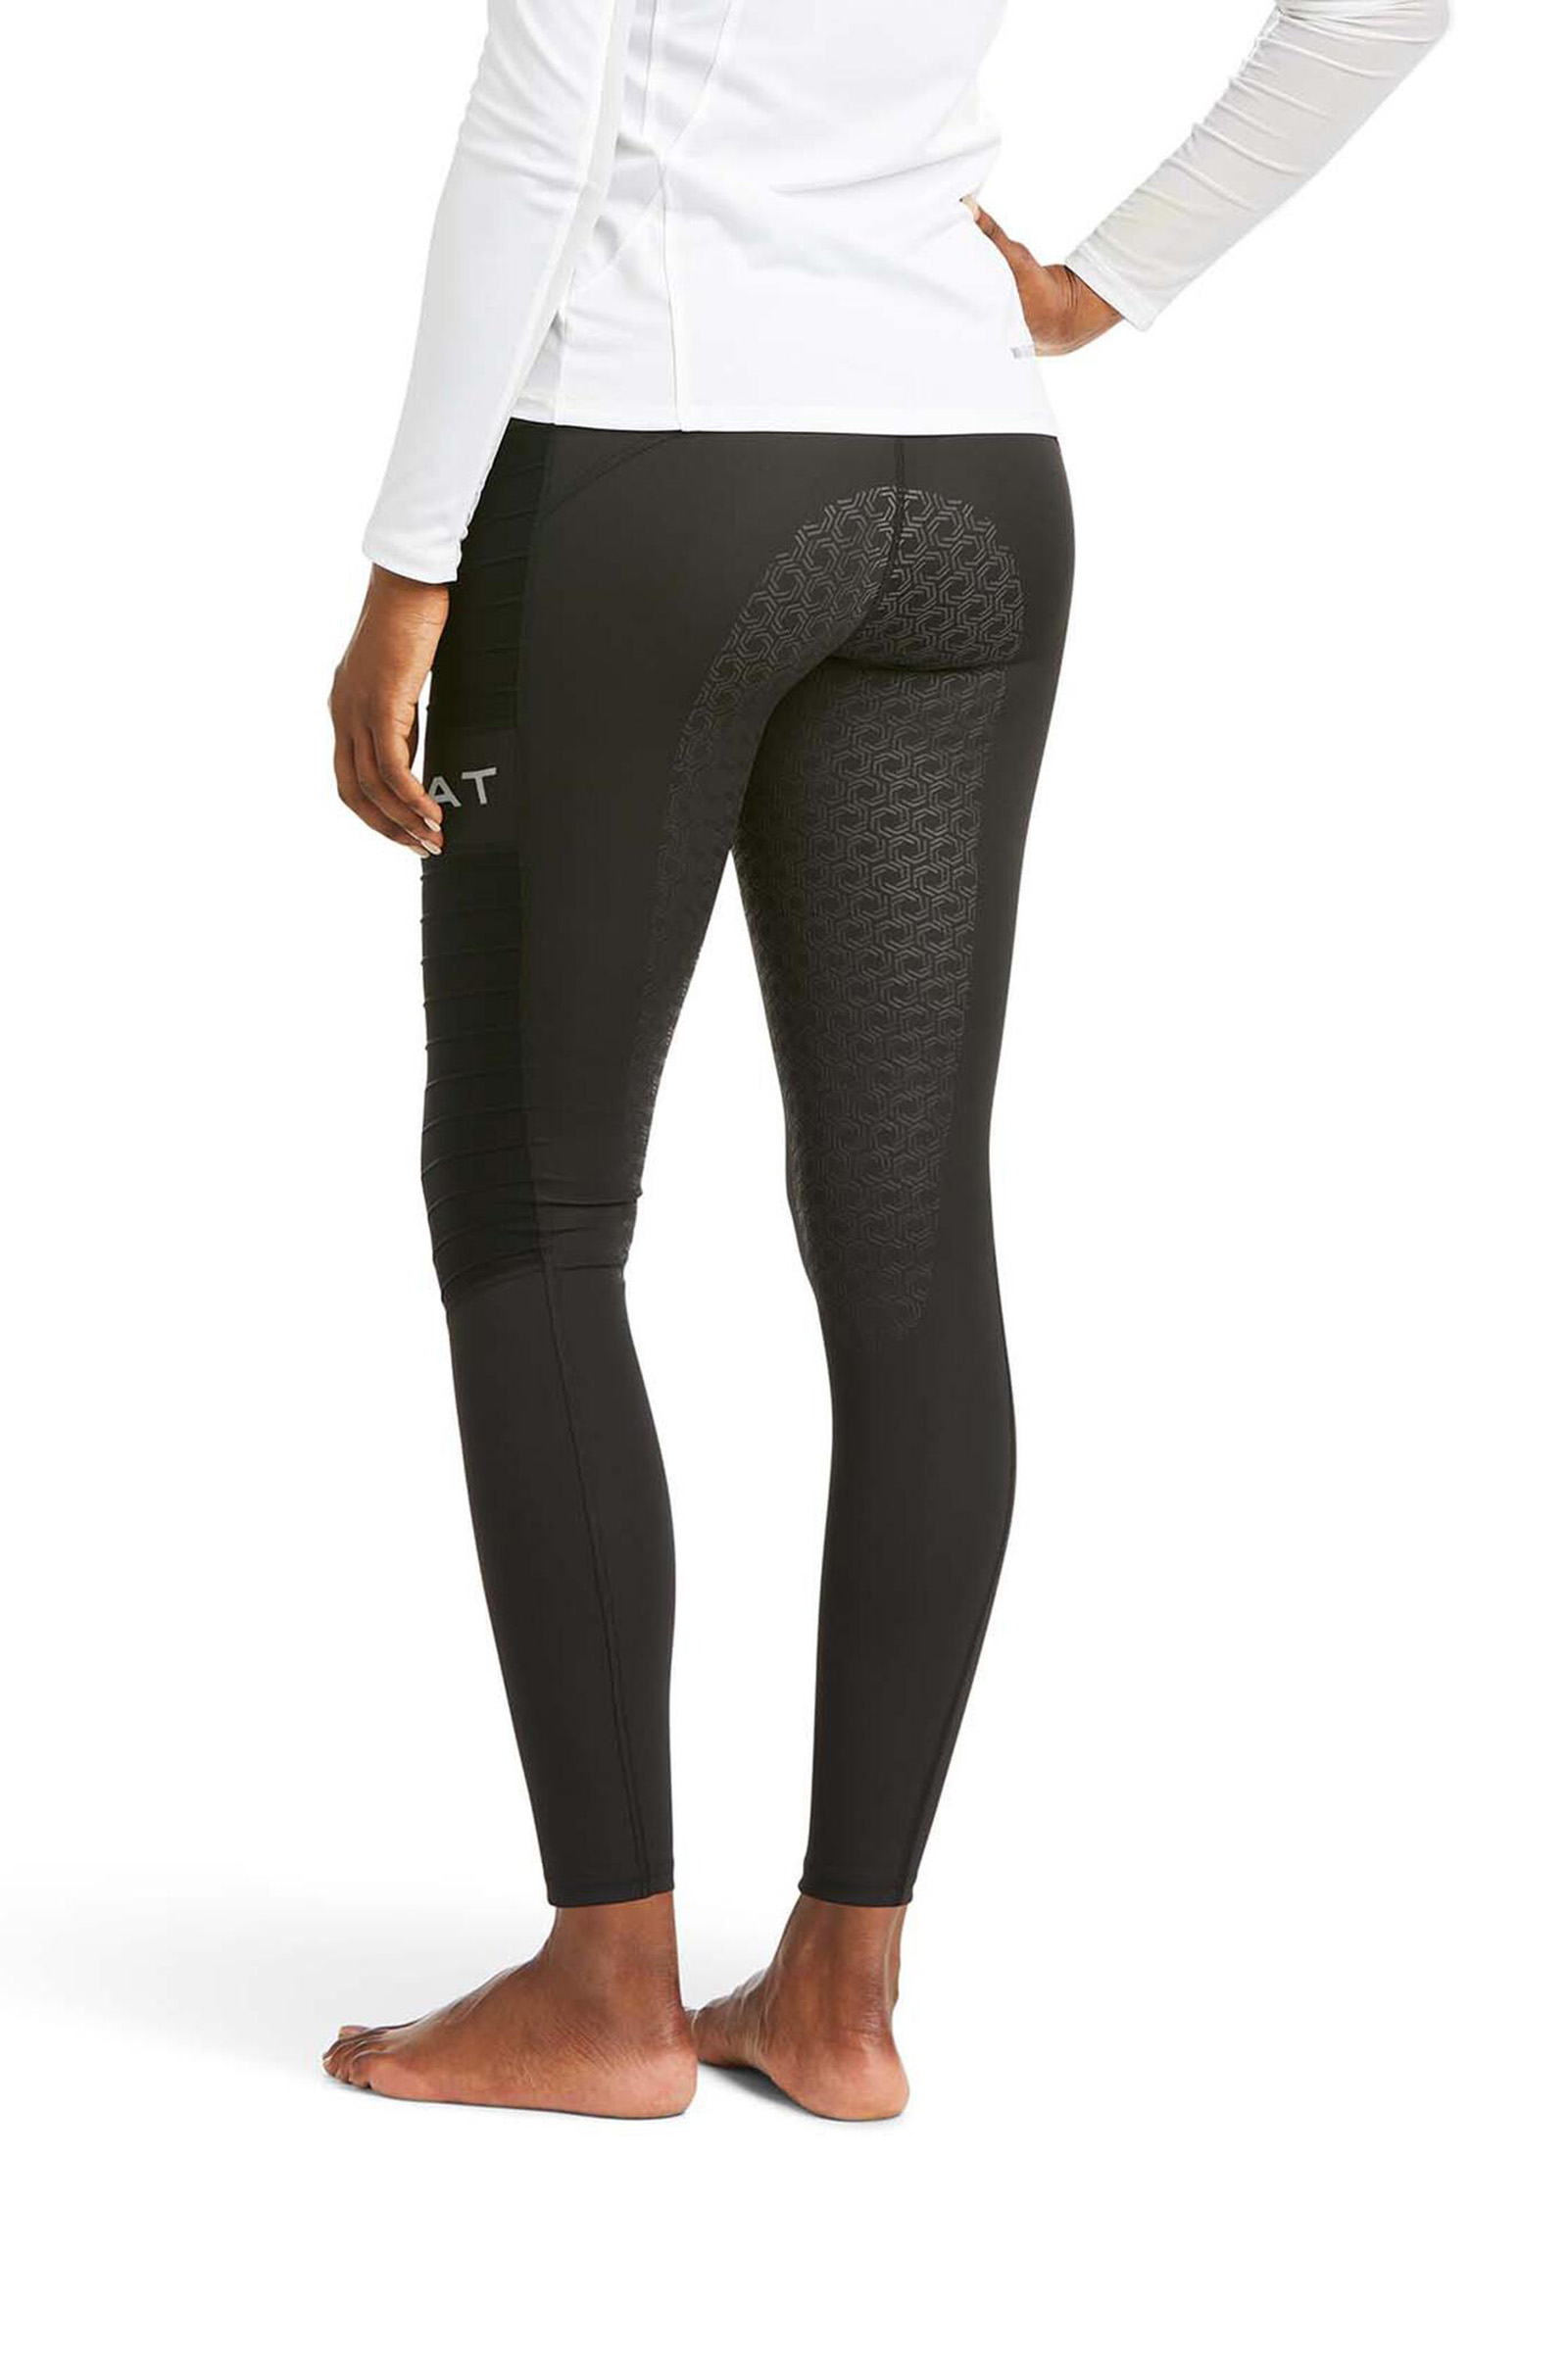 Ariat Womens EOS FULL SEAT Tights - Gone RIDING